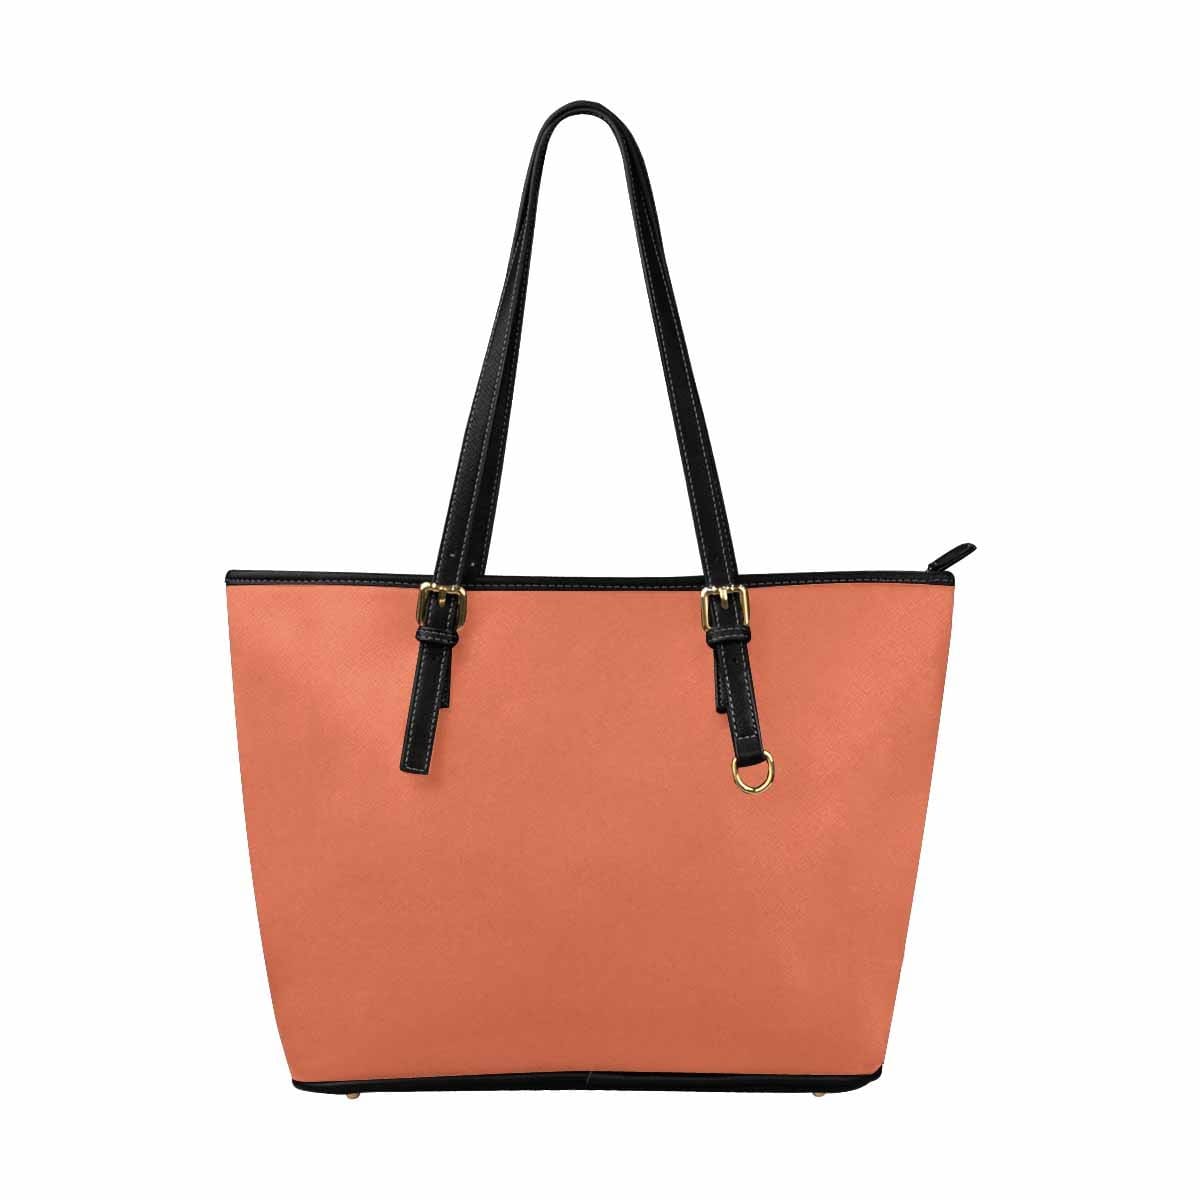 Large Leather Tote Shoulder Bag - Burnt Sienna Red - Bags | Leather Tote Bags